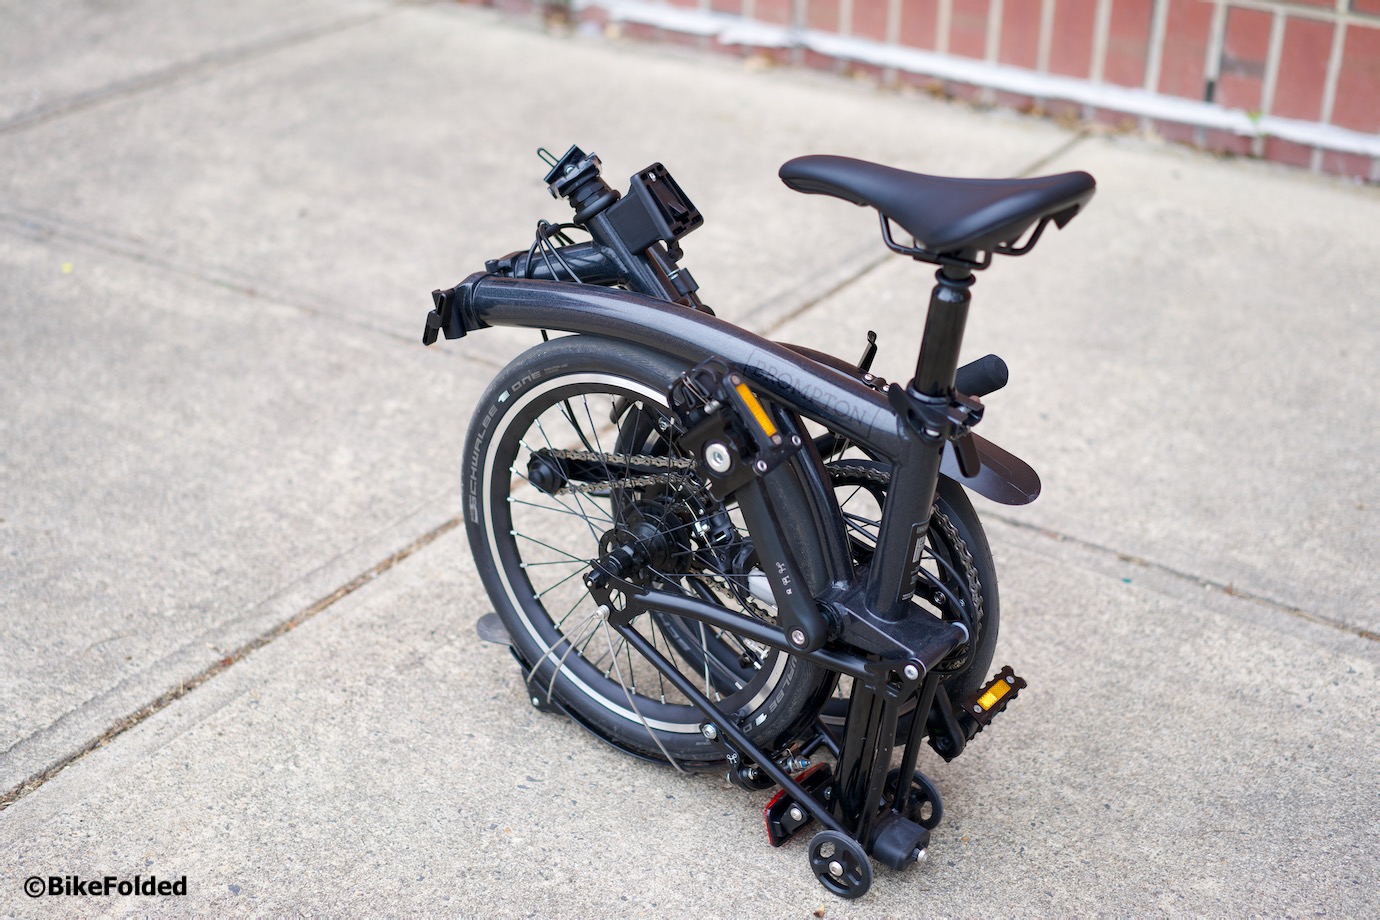 Brompton P Line Folding Bike Review - Problems of the new